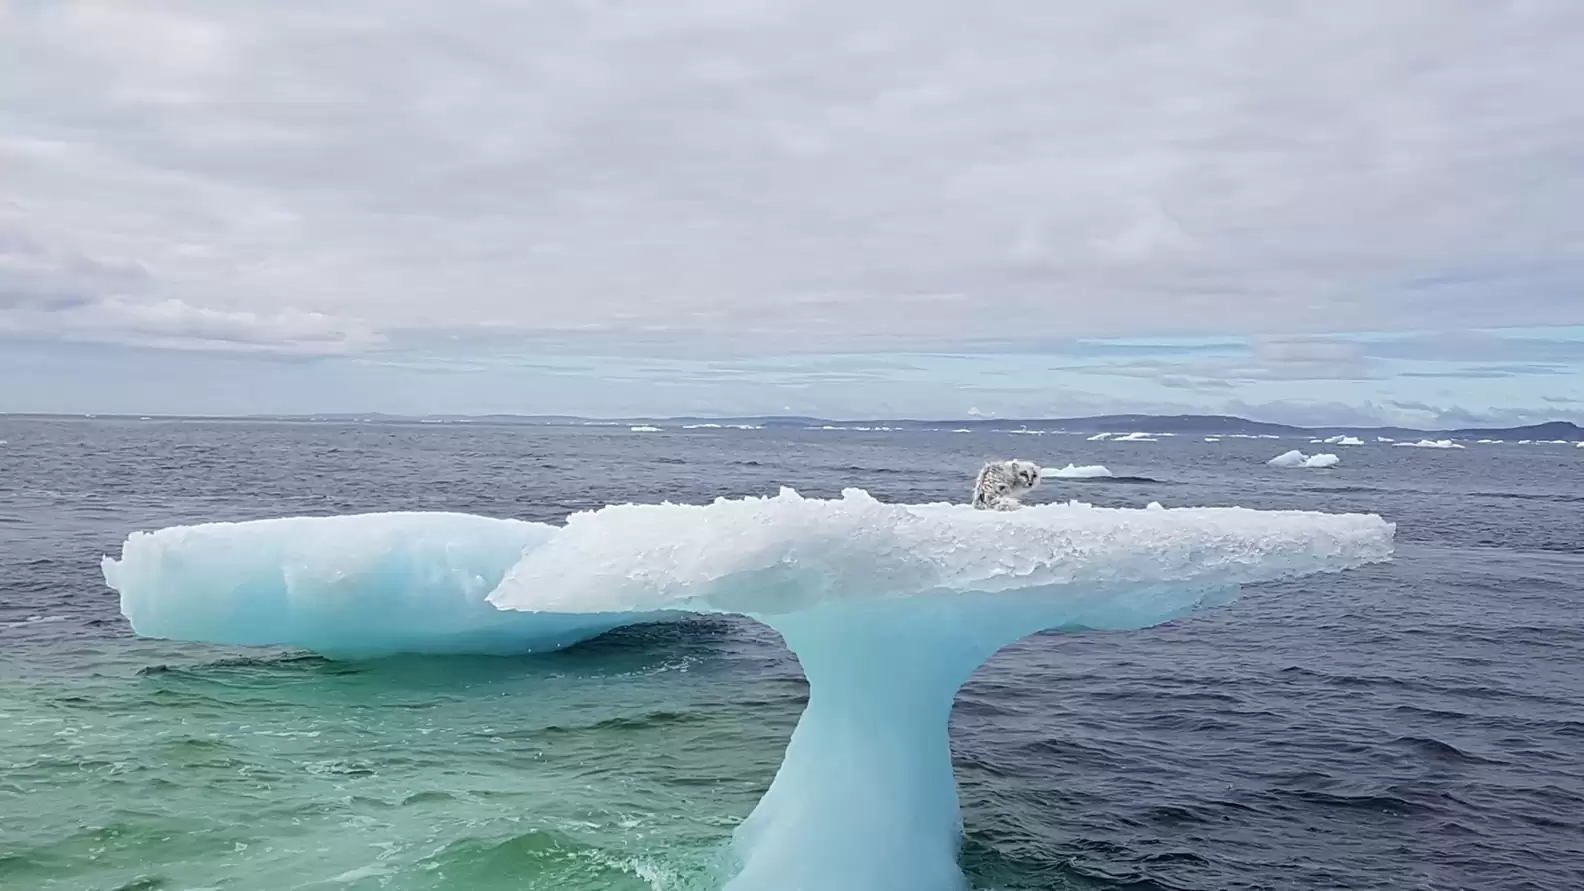 Mallory Harrigan and her crew spotted a large, mushroom-shaped iceberg off the Labrador coast and found a surprising passenger on top – initially thought to be a baby seal.